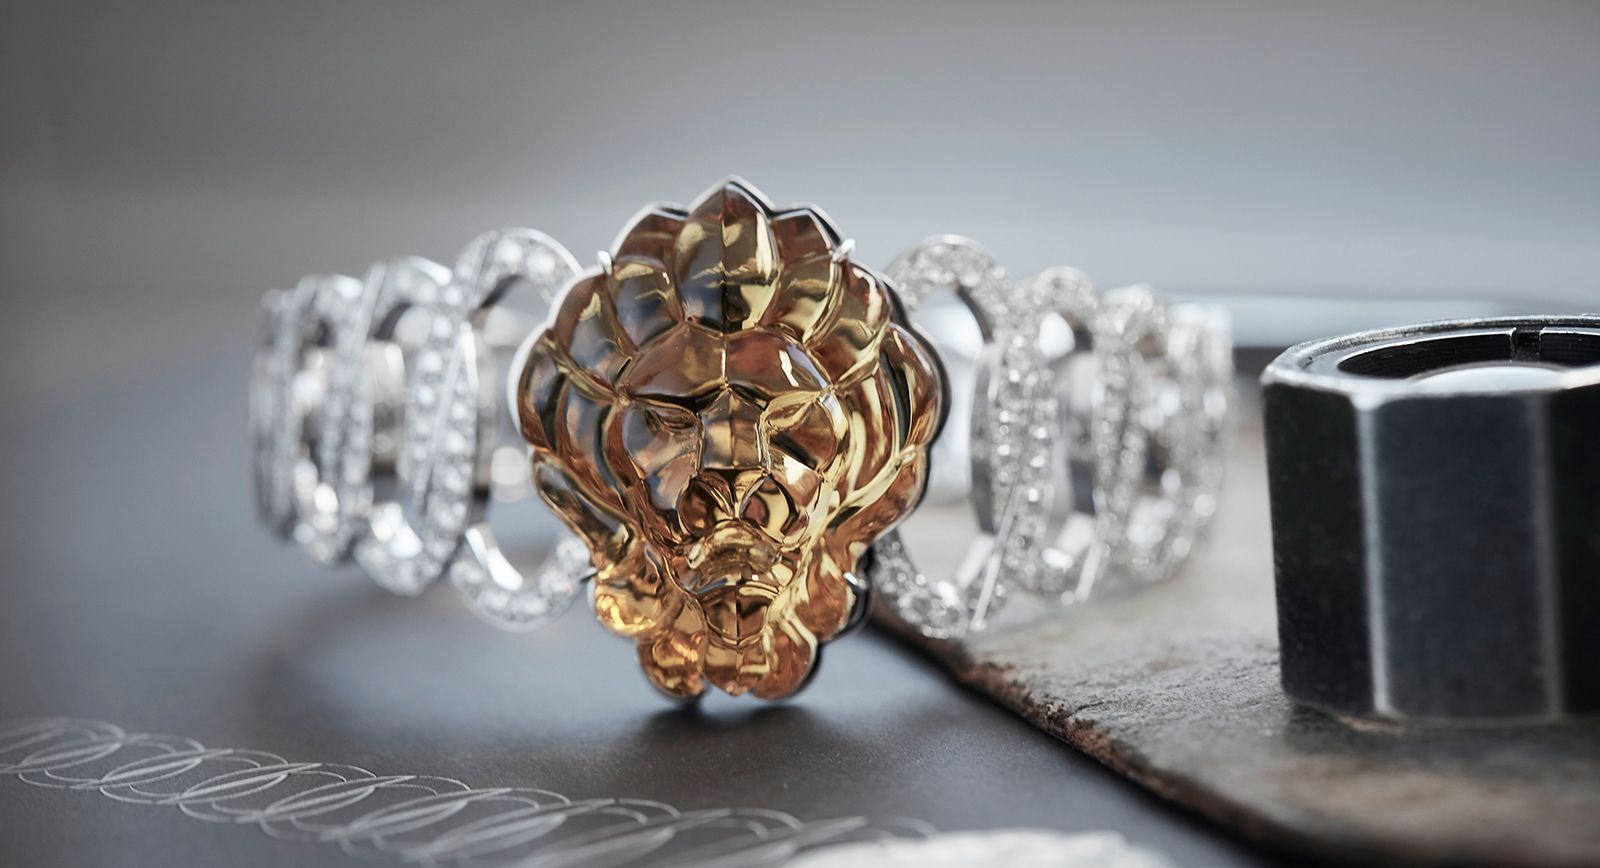 L'Esprit du Lion: a New High Jewellery Collection by Chanel